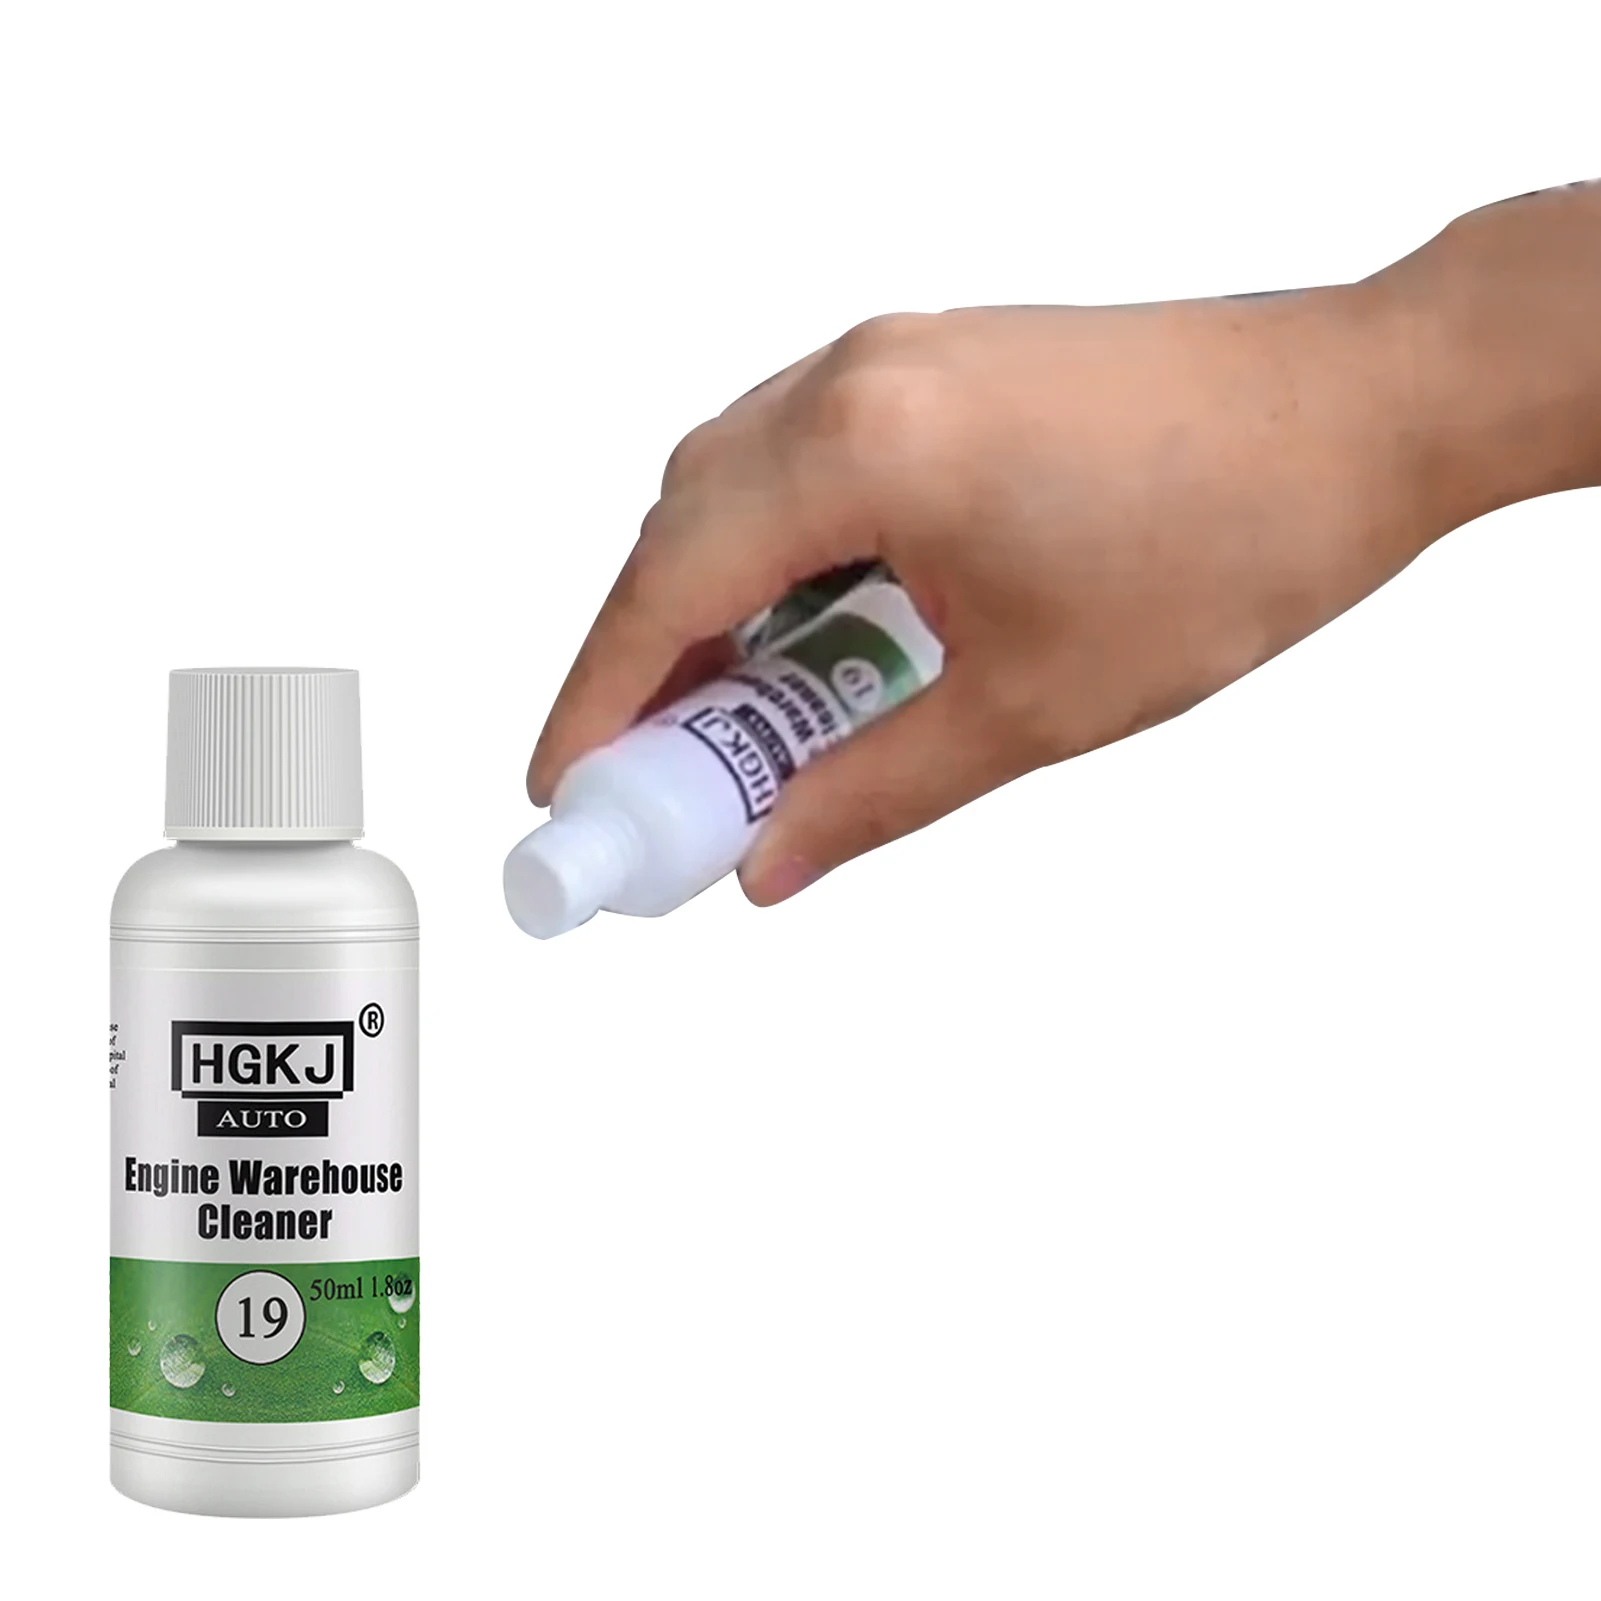 

Mutilfunction Oil Cleaner Car Wax Polish Spray Concentrated Foam Degreaser Safe For Home Garage Cars Trucks Suvs Jeeps